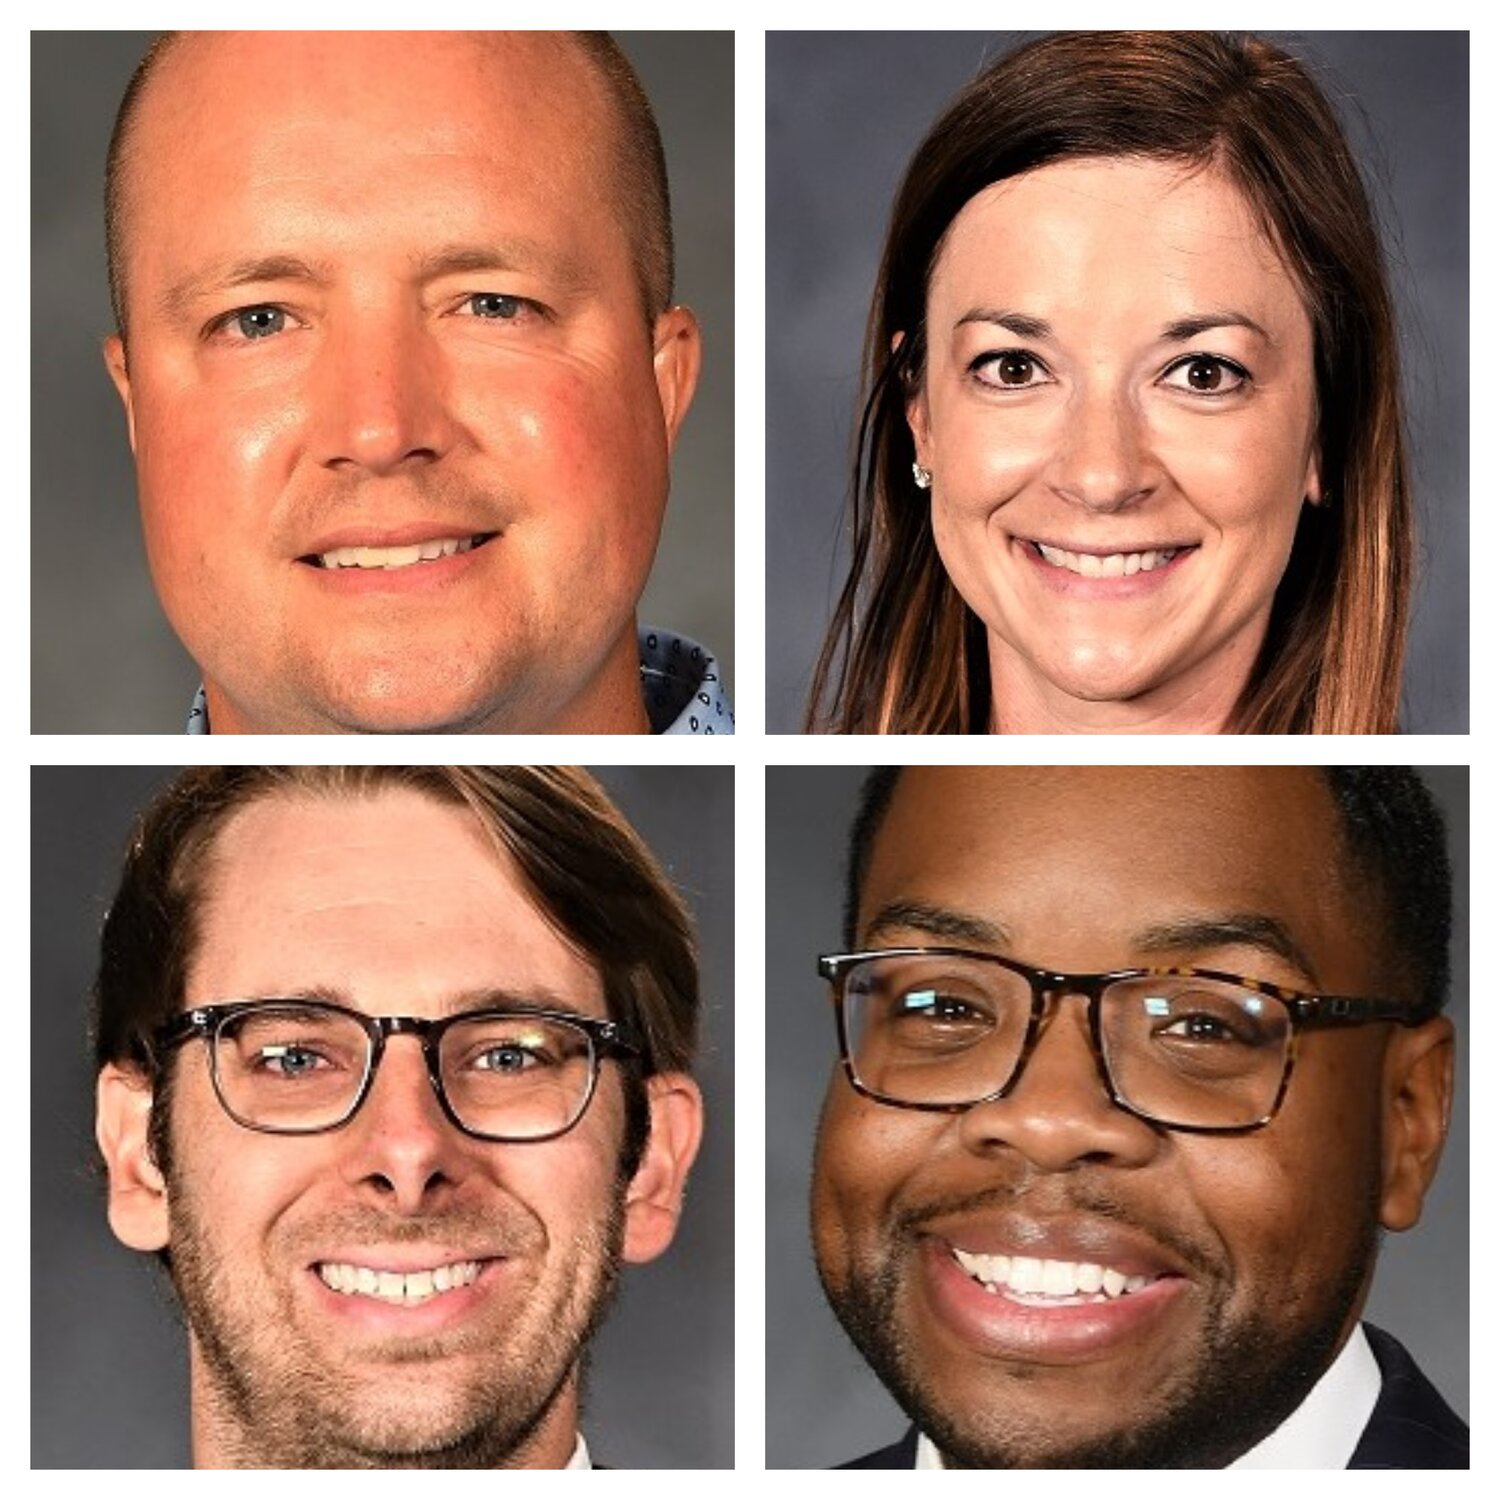 Clockwise from top left: New members of the board of Fayetteville Technical Community College Foundation include Cody Hopper, Jamie Harrell Terracciano, Lindsay Whitley  and Alex Keith.